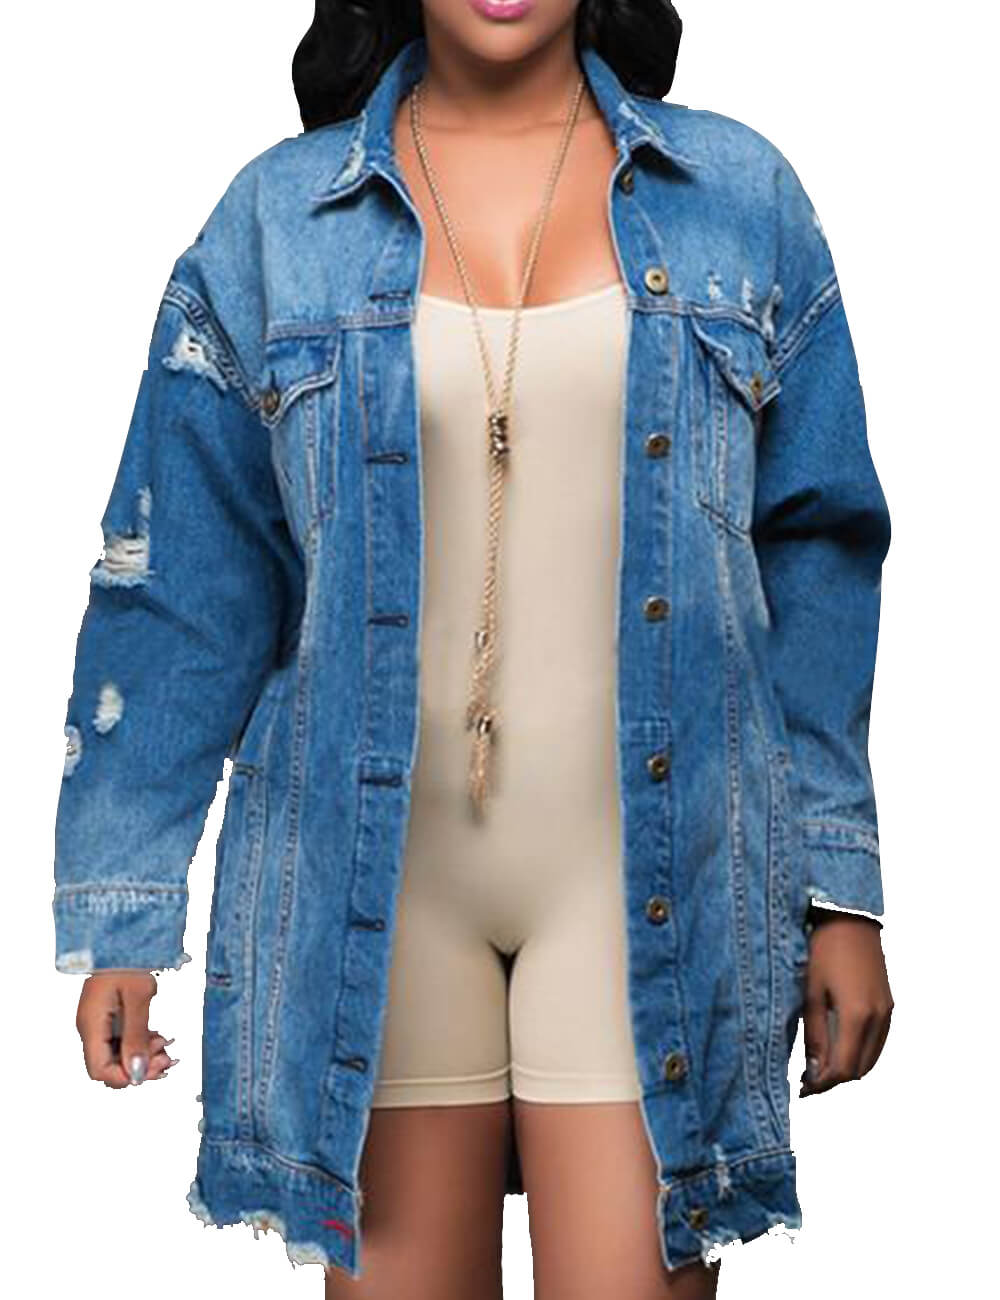 Oversized Distressed Denim Jeans Outfits Coat Fall Ripped Outerwear Denim Jacket Plus Size